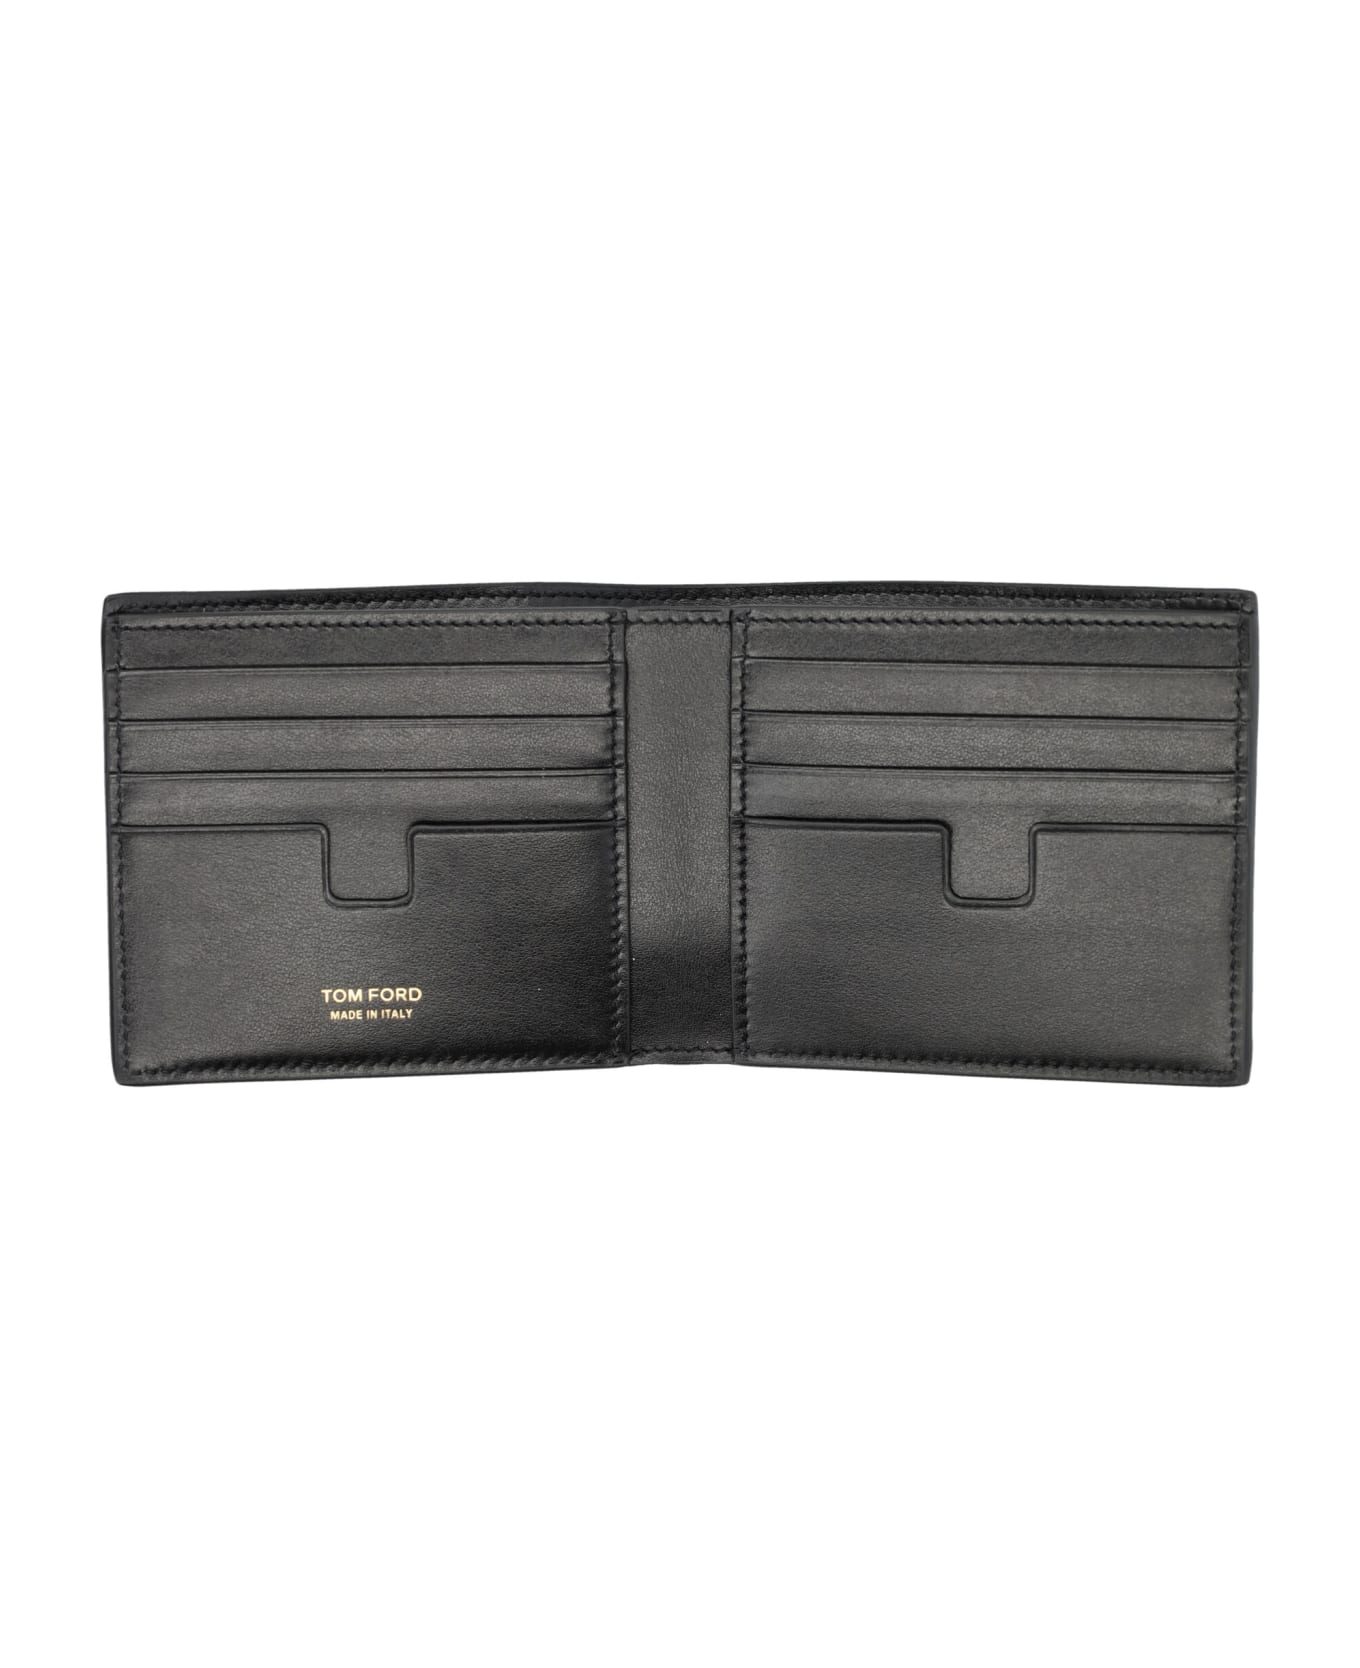 Tom Ford Glossy Printed Croc Classic Bifold Wallet By Tom Ford - BLACK